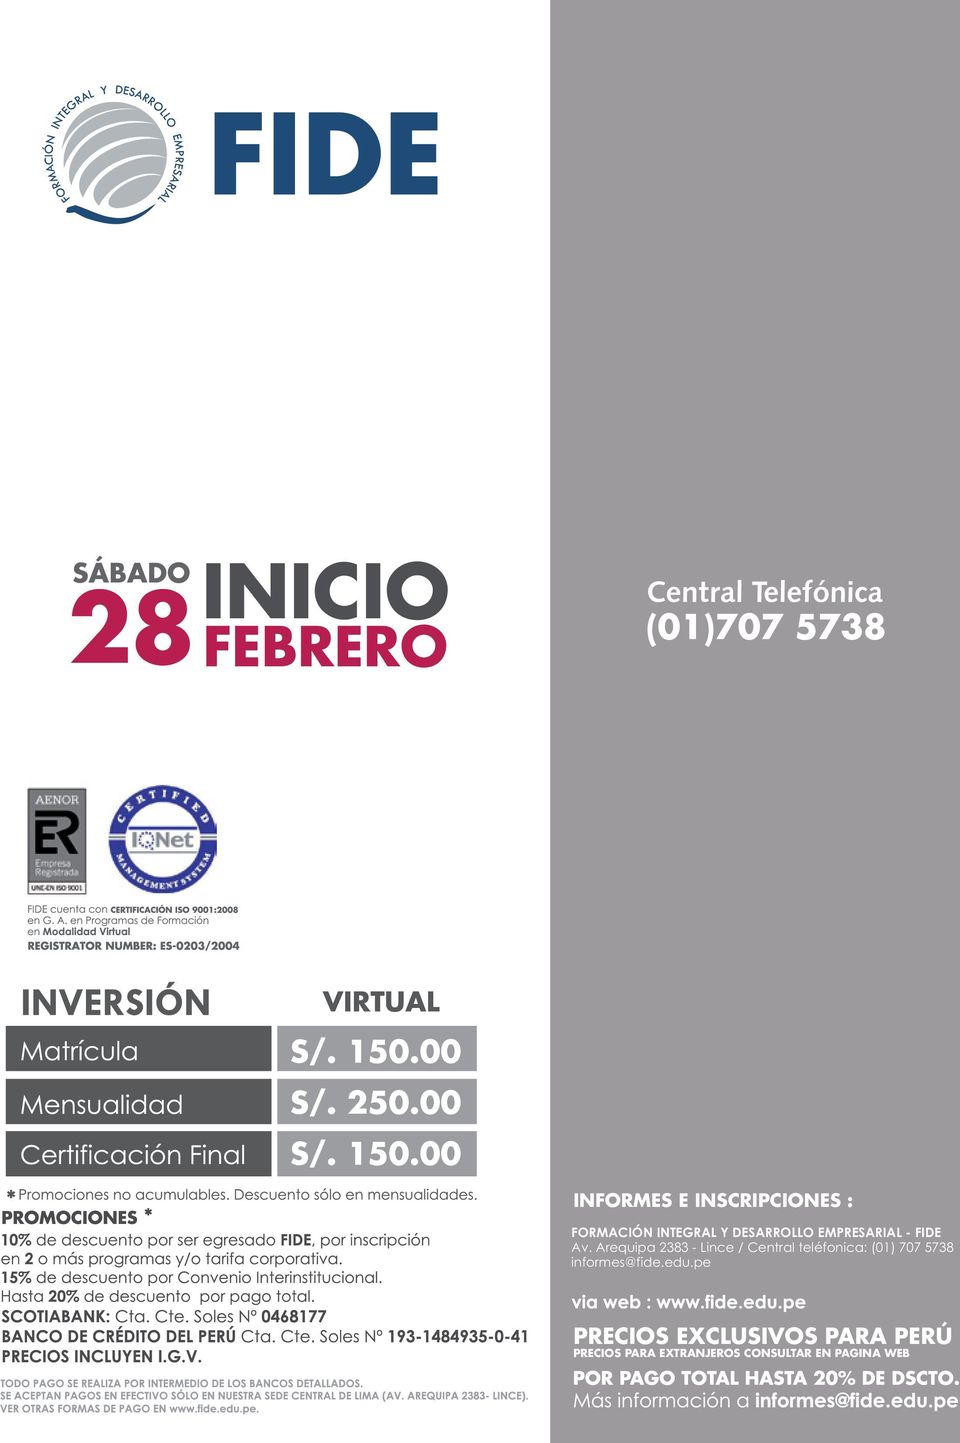 Arequipa 2383 - Lince / Central teléfonica: (01) 707 5738